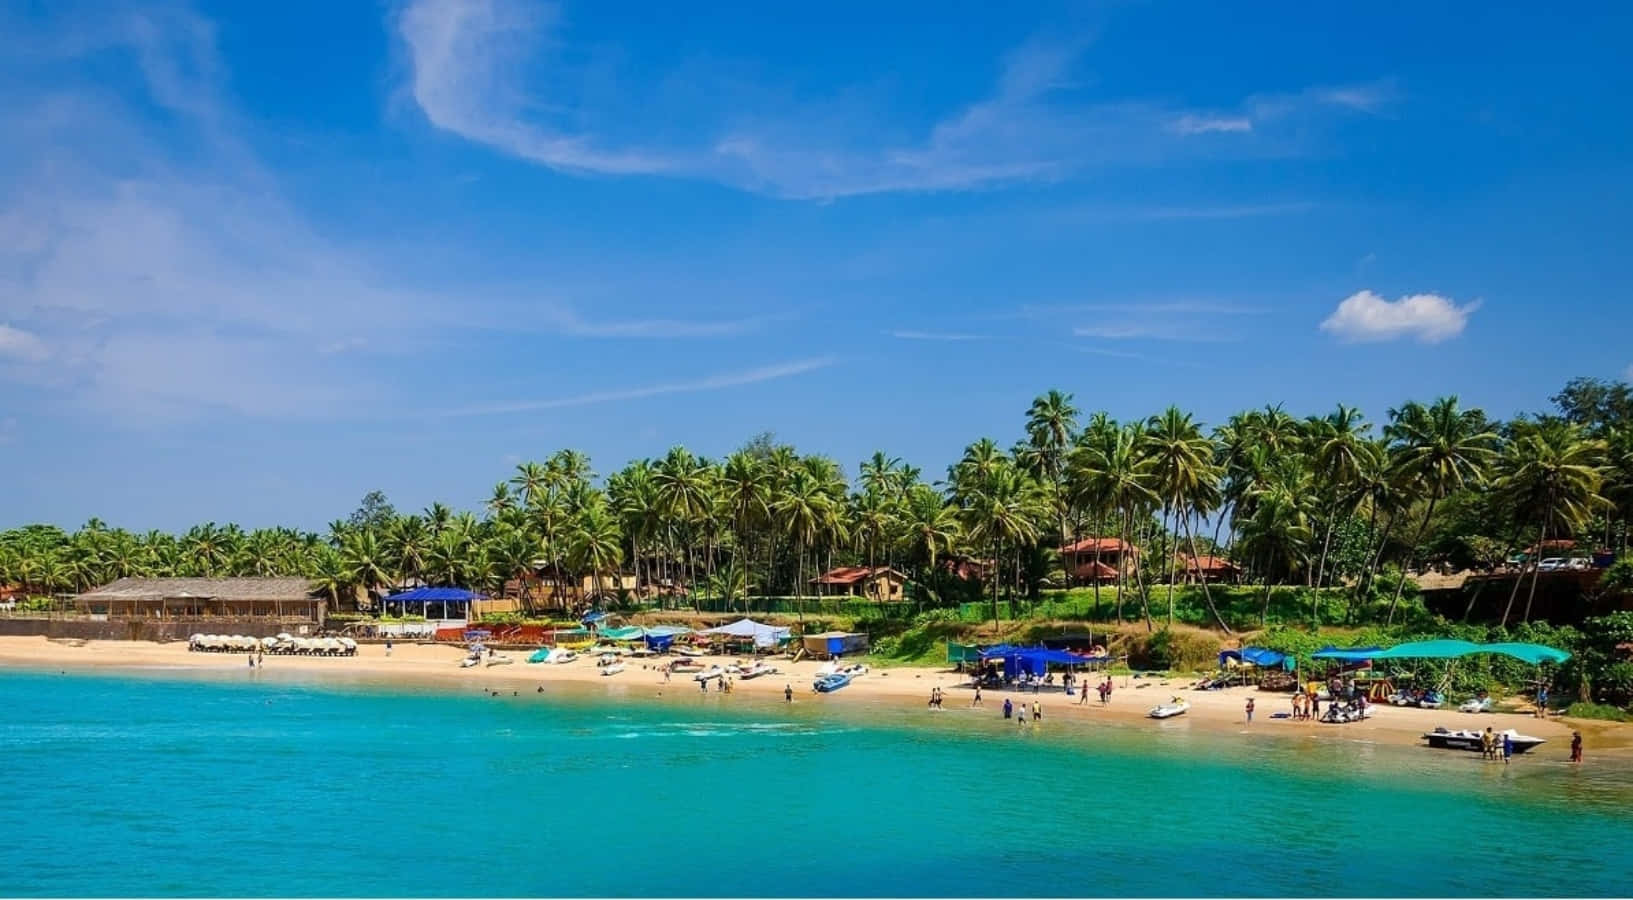 “Experience the beautiful colours found within the Goa Beach paradise.”